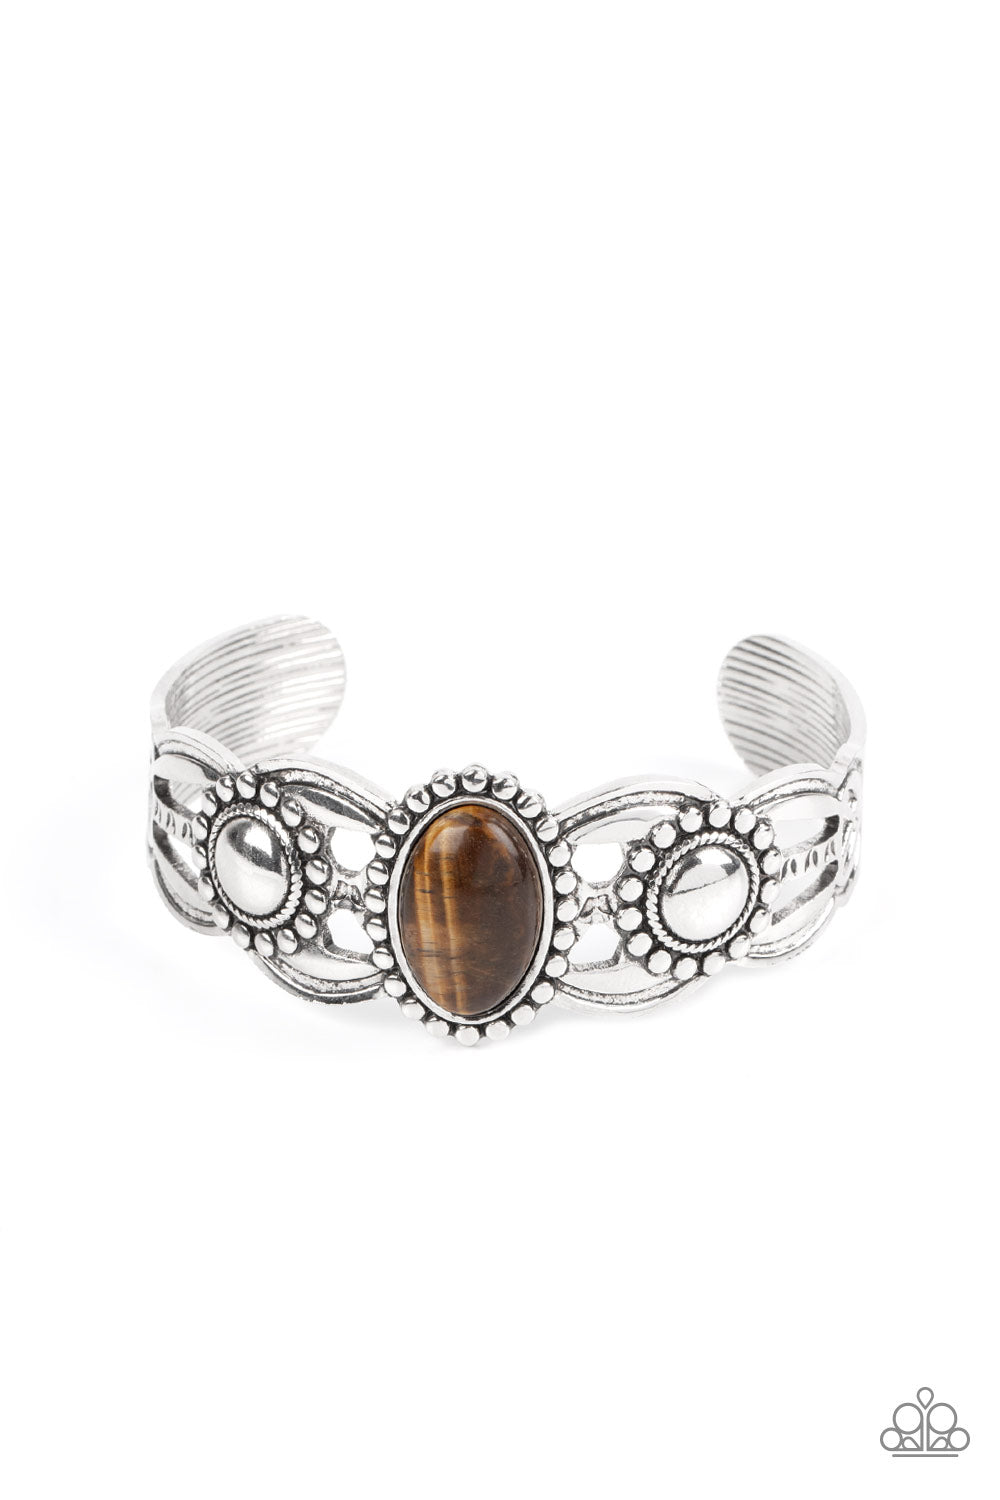 Paparazzi Accessories Solar Solstice - Brown Cuff Bracelets an oval Tiger's eye stone is pressed into the center of a studded silver frame atop an airy silver cuff embellished in studded sun-like frames for an earthy pop of seasonal color around the wrist.